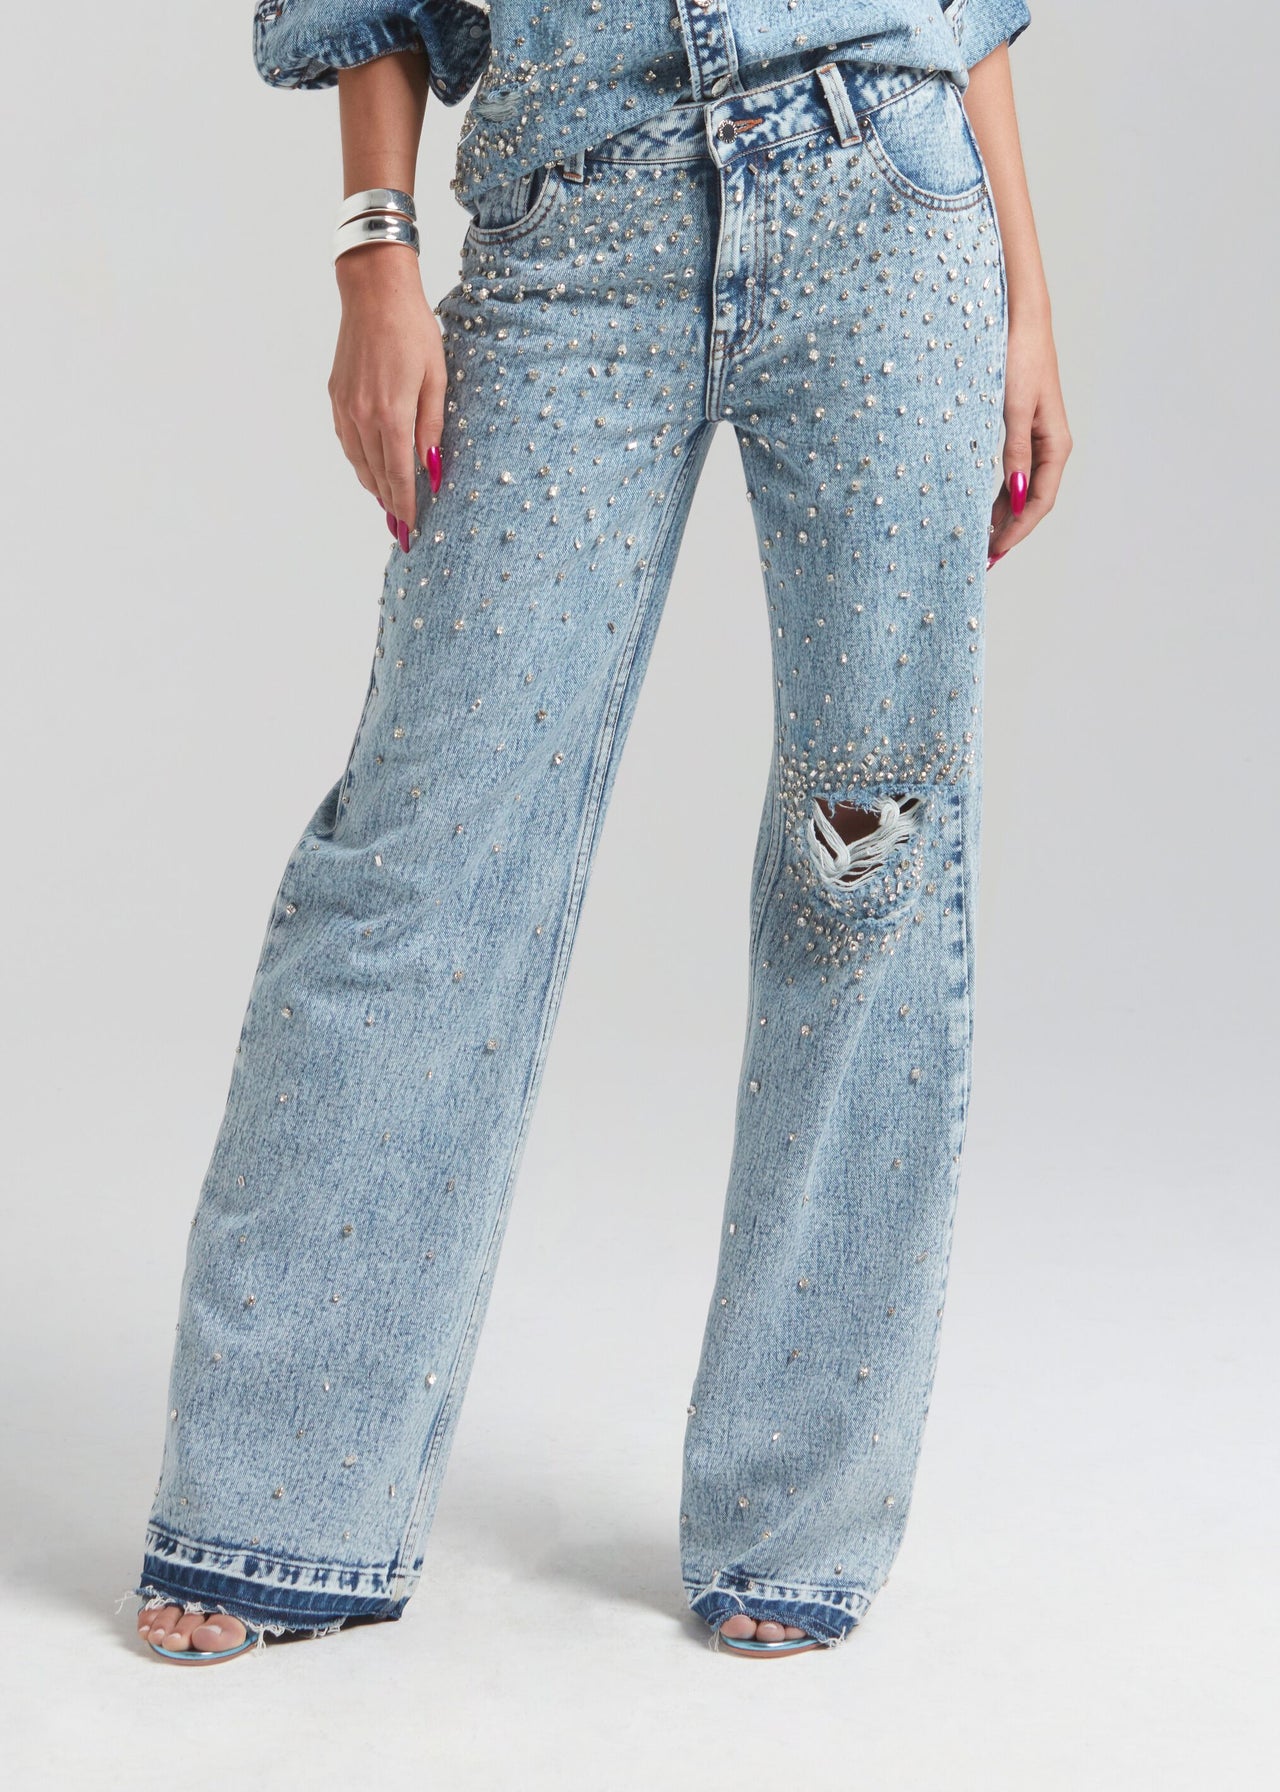 Driftwood Royce After Party Rhinestone Embellished Cropped Stretch Jeans - 31